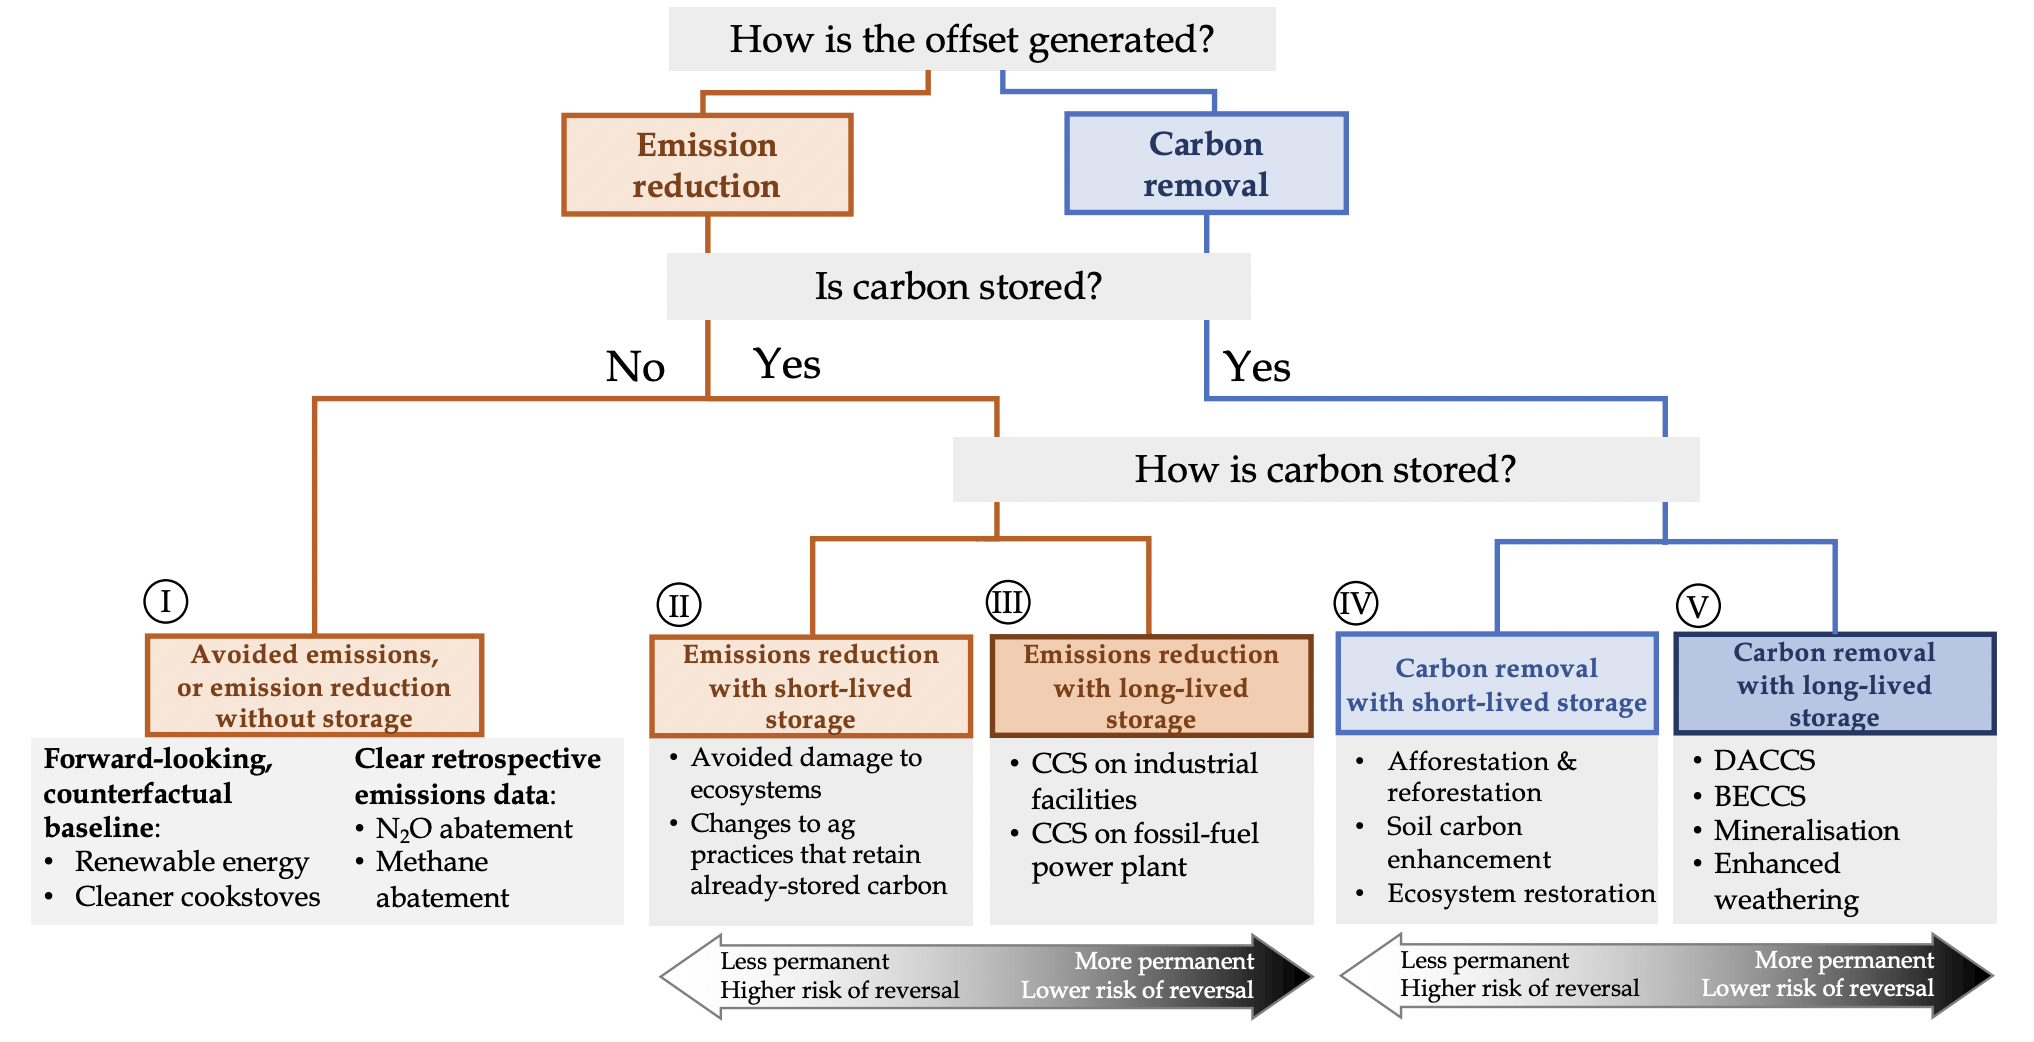 The following sections will address carbon offsets, which are generally broken into two overarching categories: “removal” offsets representing carbon removed from the atmosphere, and “reduction” offsets that help mitigate the release of carbon into the atmosphere. Source: Taxonomy of Carbon Offsets by Oxford University, used under a fair use rationale. 